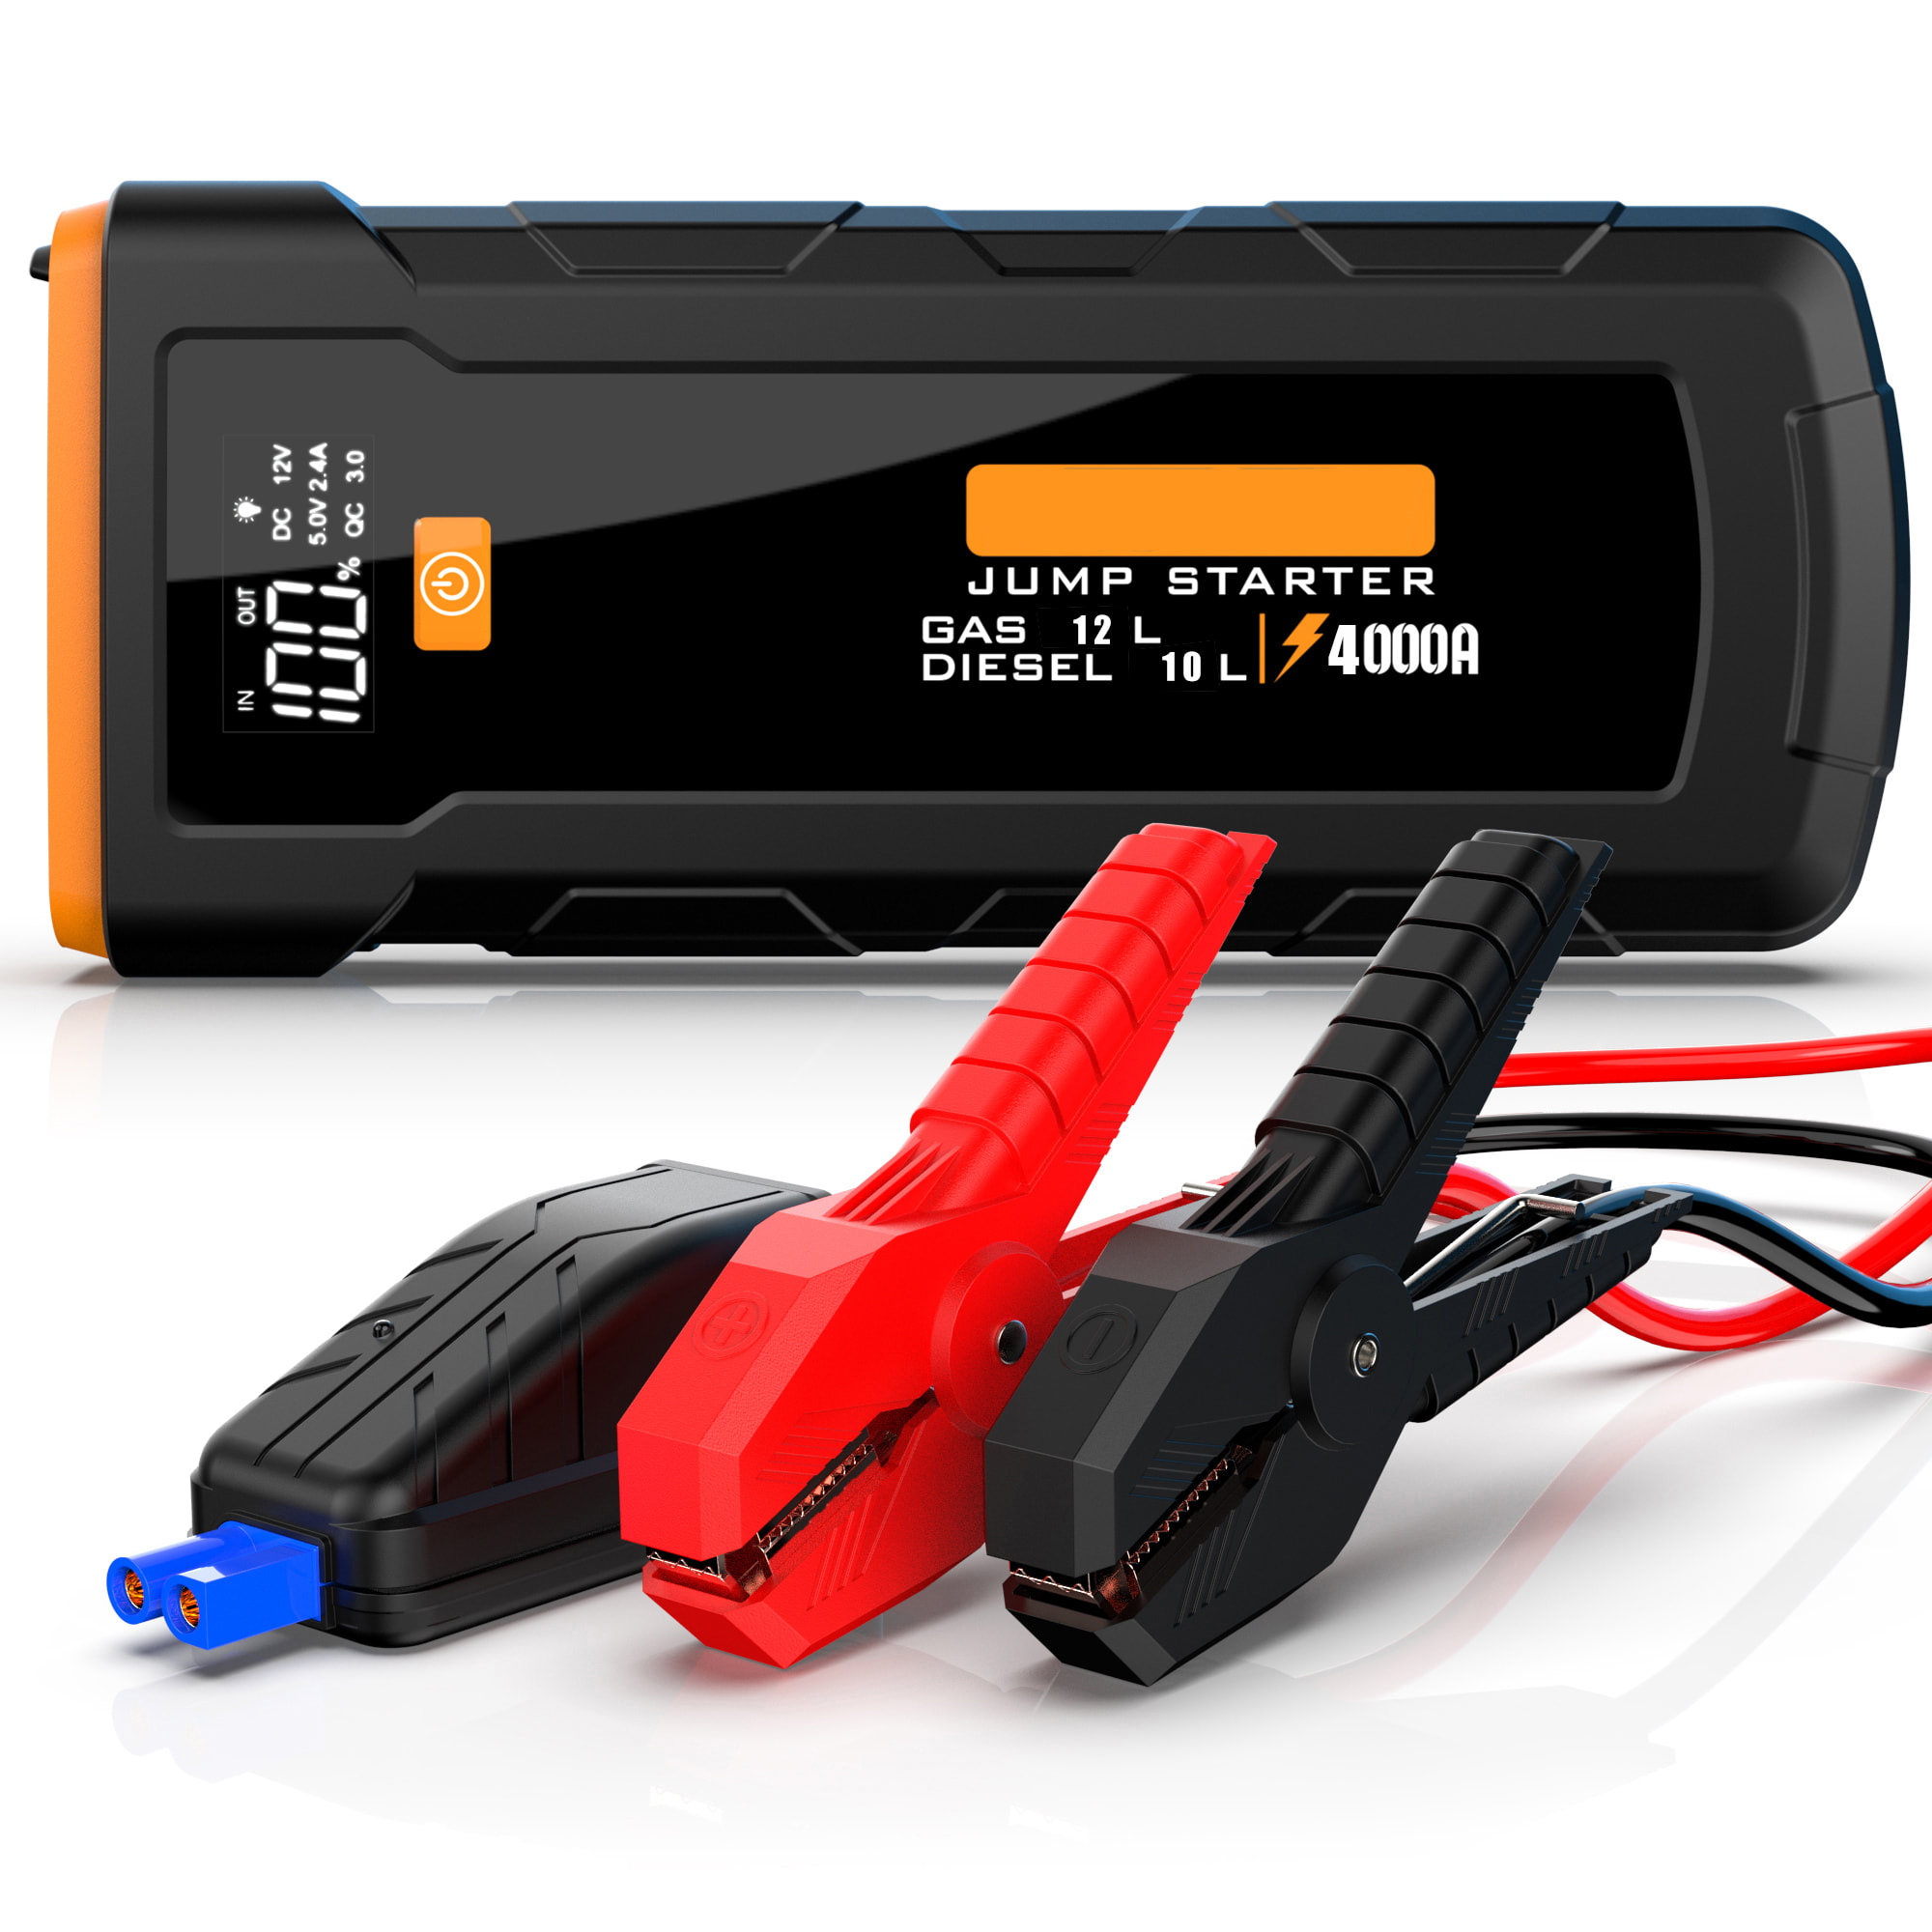 Tacklife Car Jump Starters in Car Battery Chargers and Jump